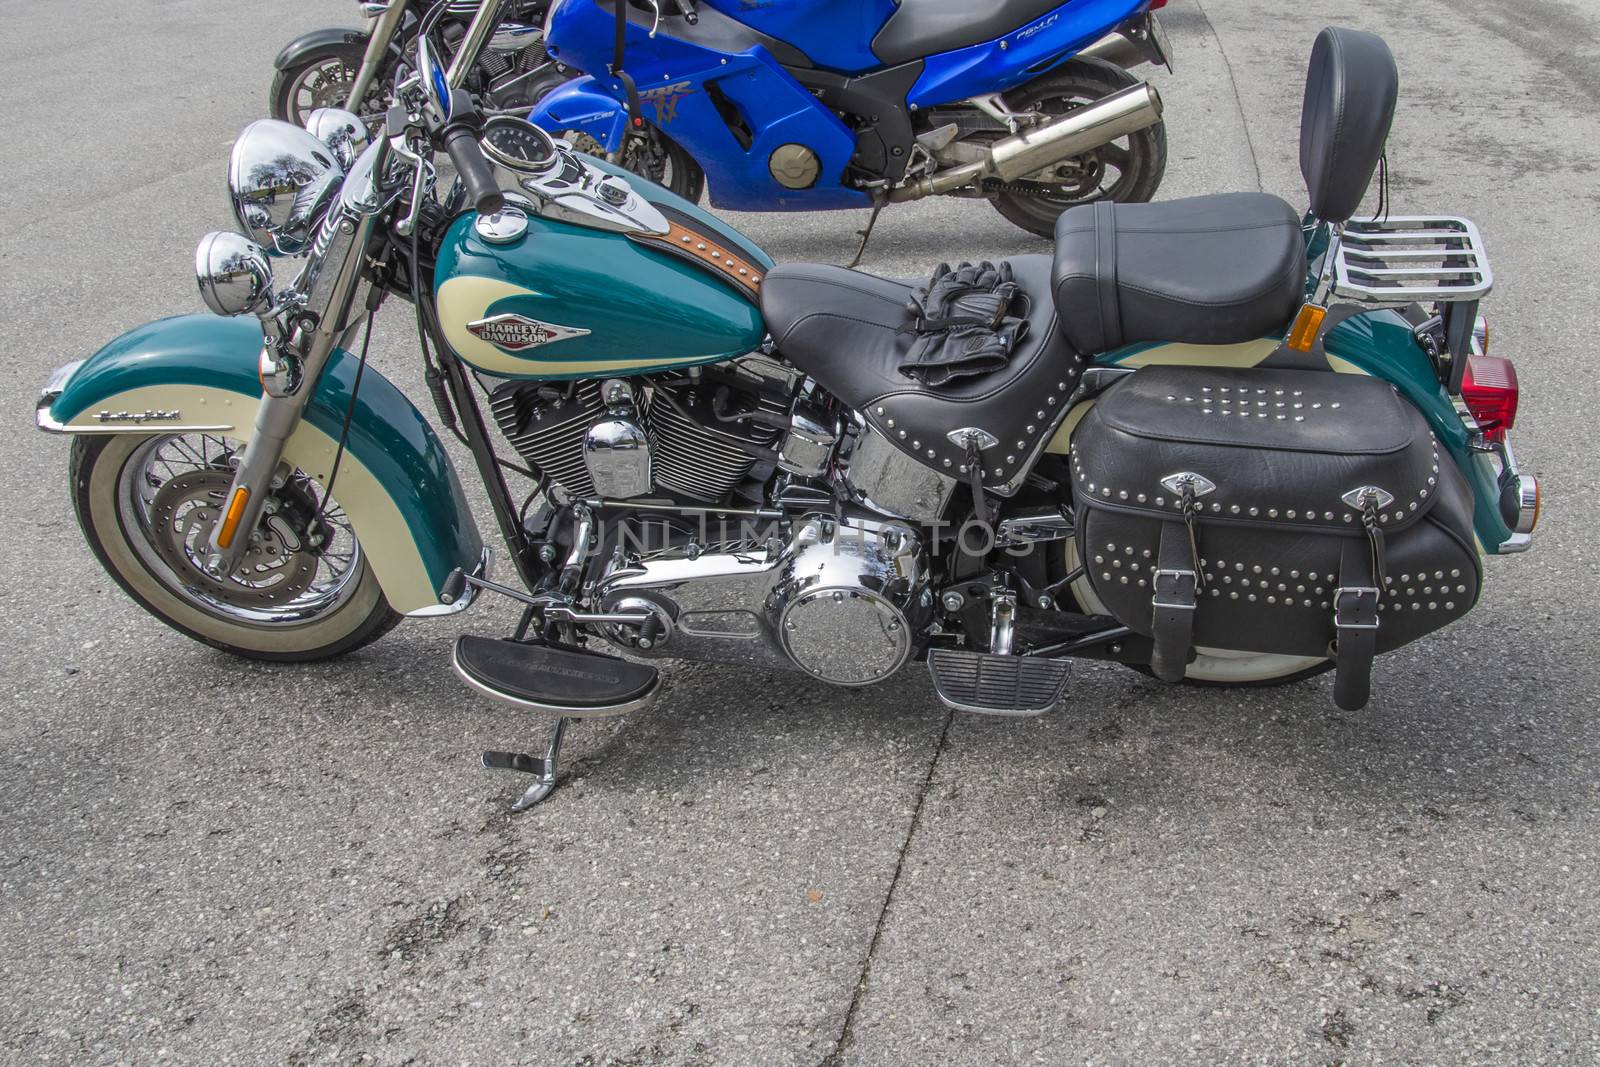 Every year in May there is a motorcycle meeting at Fredriksten fortress in Halden, Norway. In this photo harley davidson.